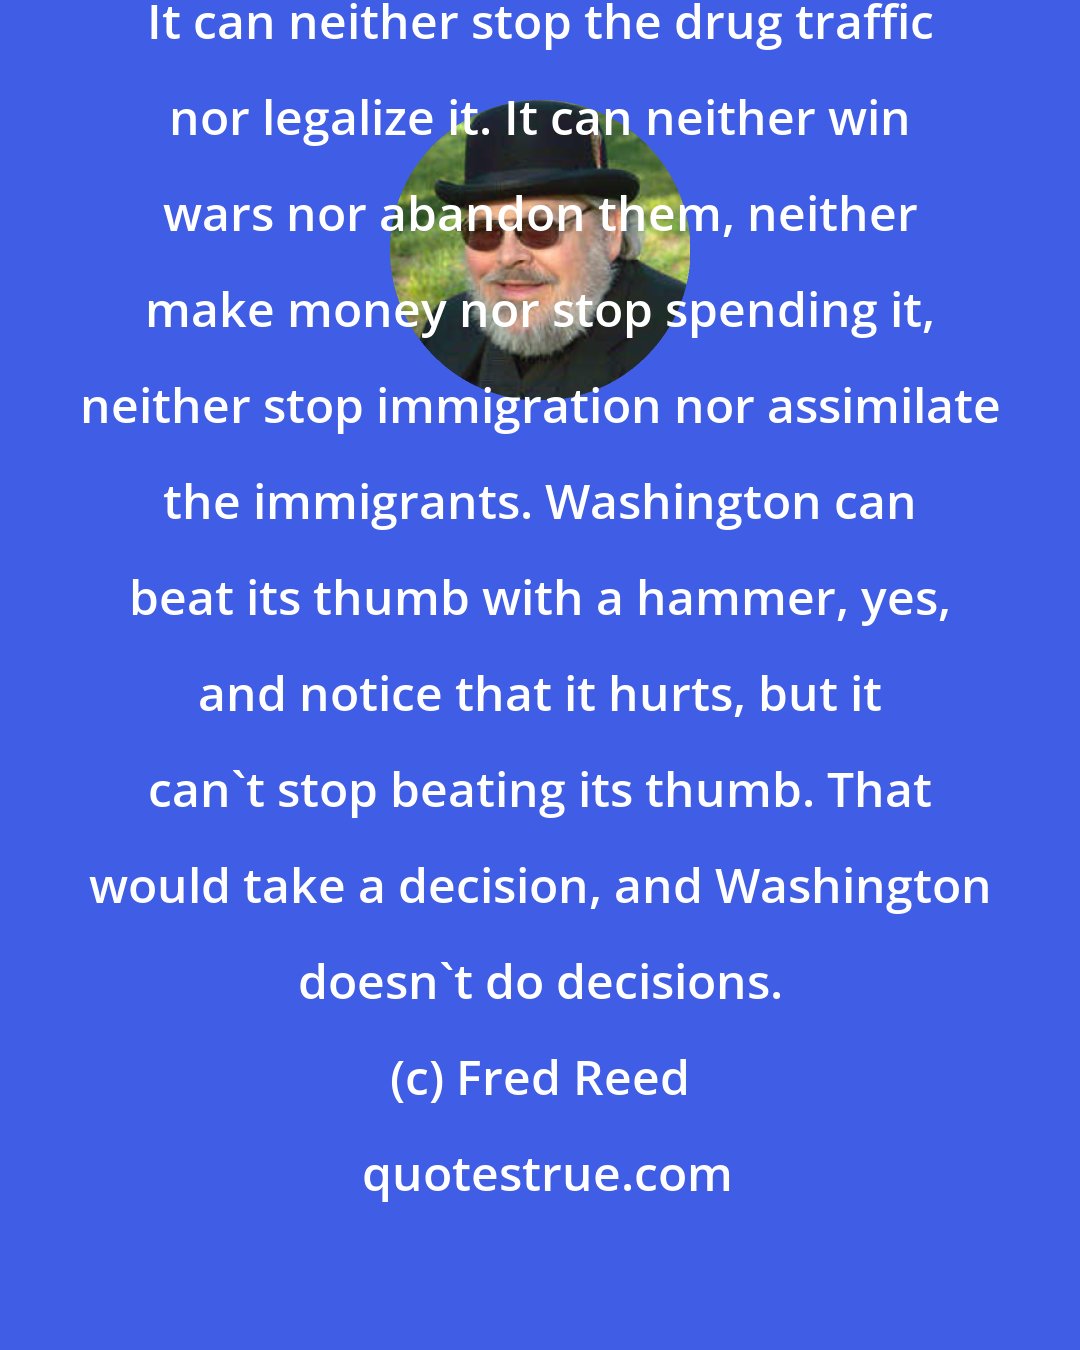 Fred Reed: The US no longer does decisions. It can neither stop the drug traffic nor legalize it. It can neither win wars nor abandon them, neither make money nor stop spending it, neither stop immigration nor assimilate the immigrants. Washington can beat its thumb with a hammer, yes, and notice that it hurts, but it can't stop beating its thumb. That would take a decision, and Washington doesn't do decisions.